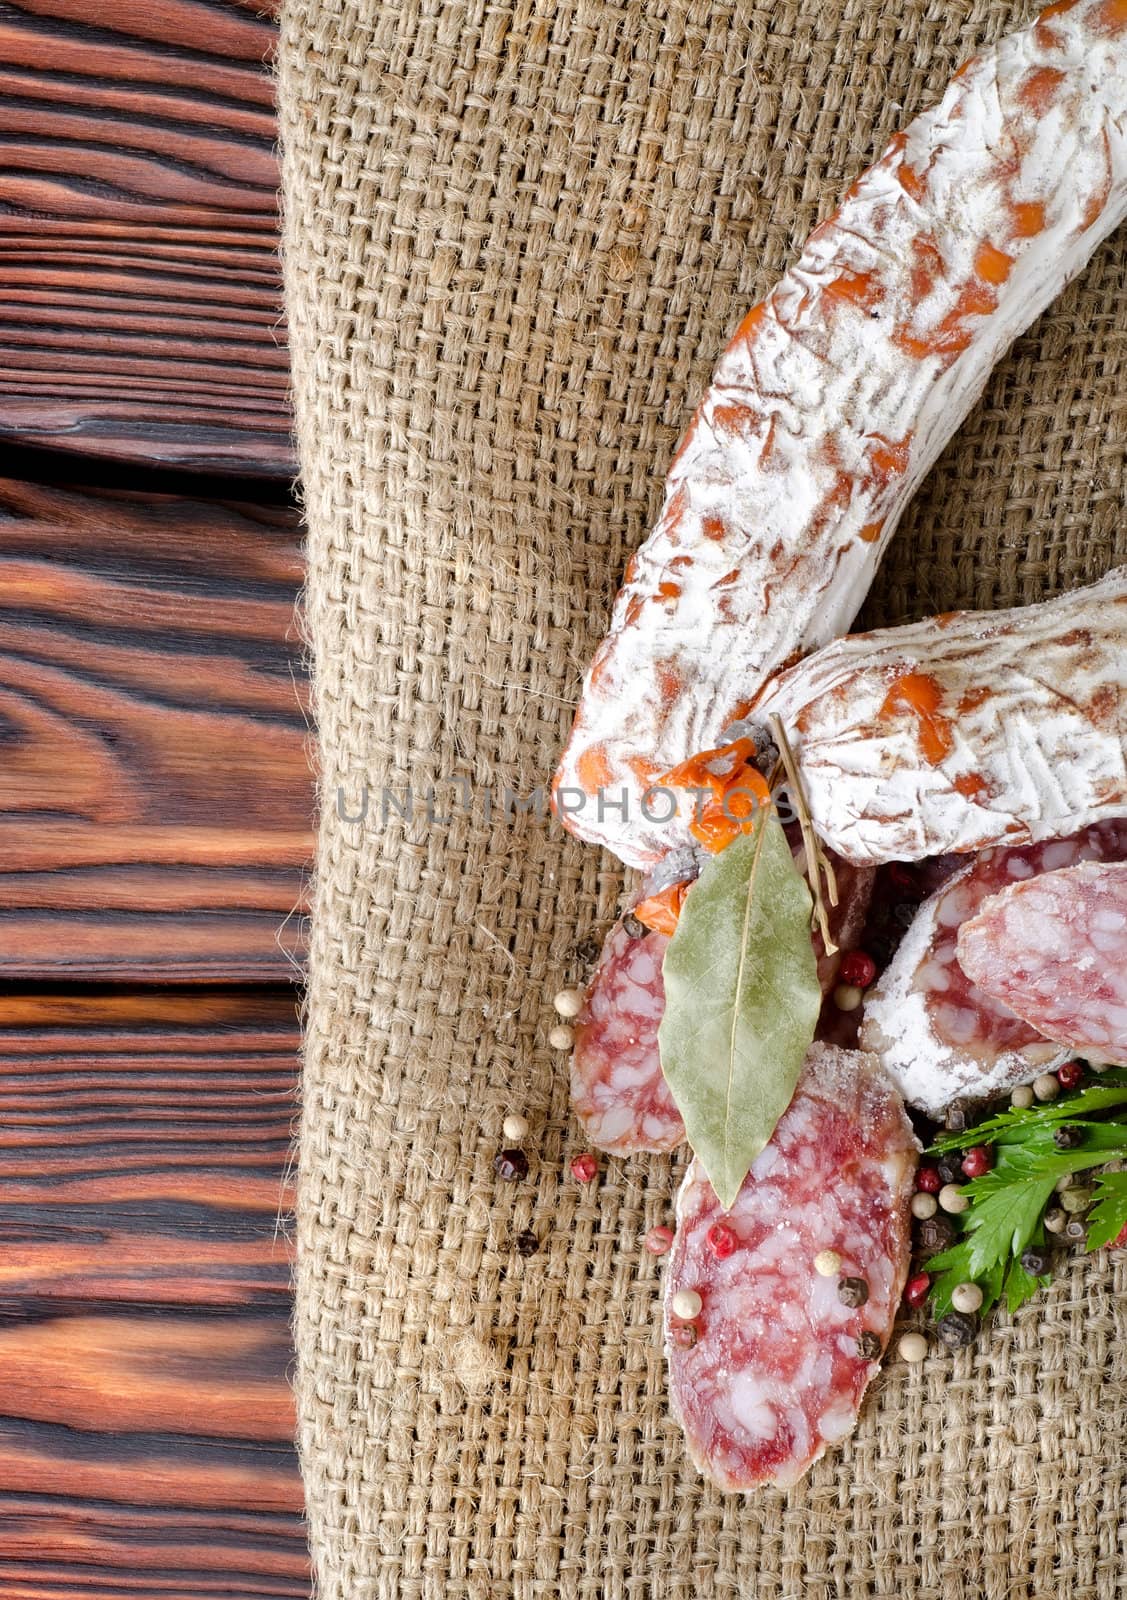 Salami sausage and spices in the tissue